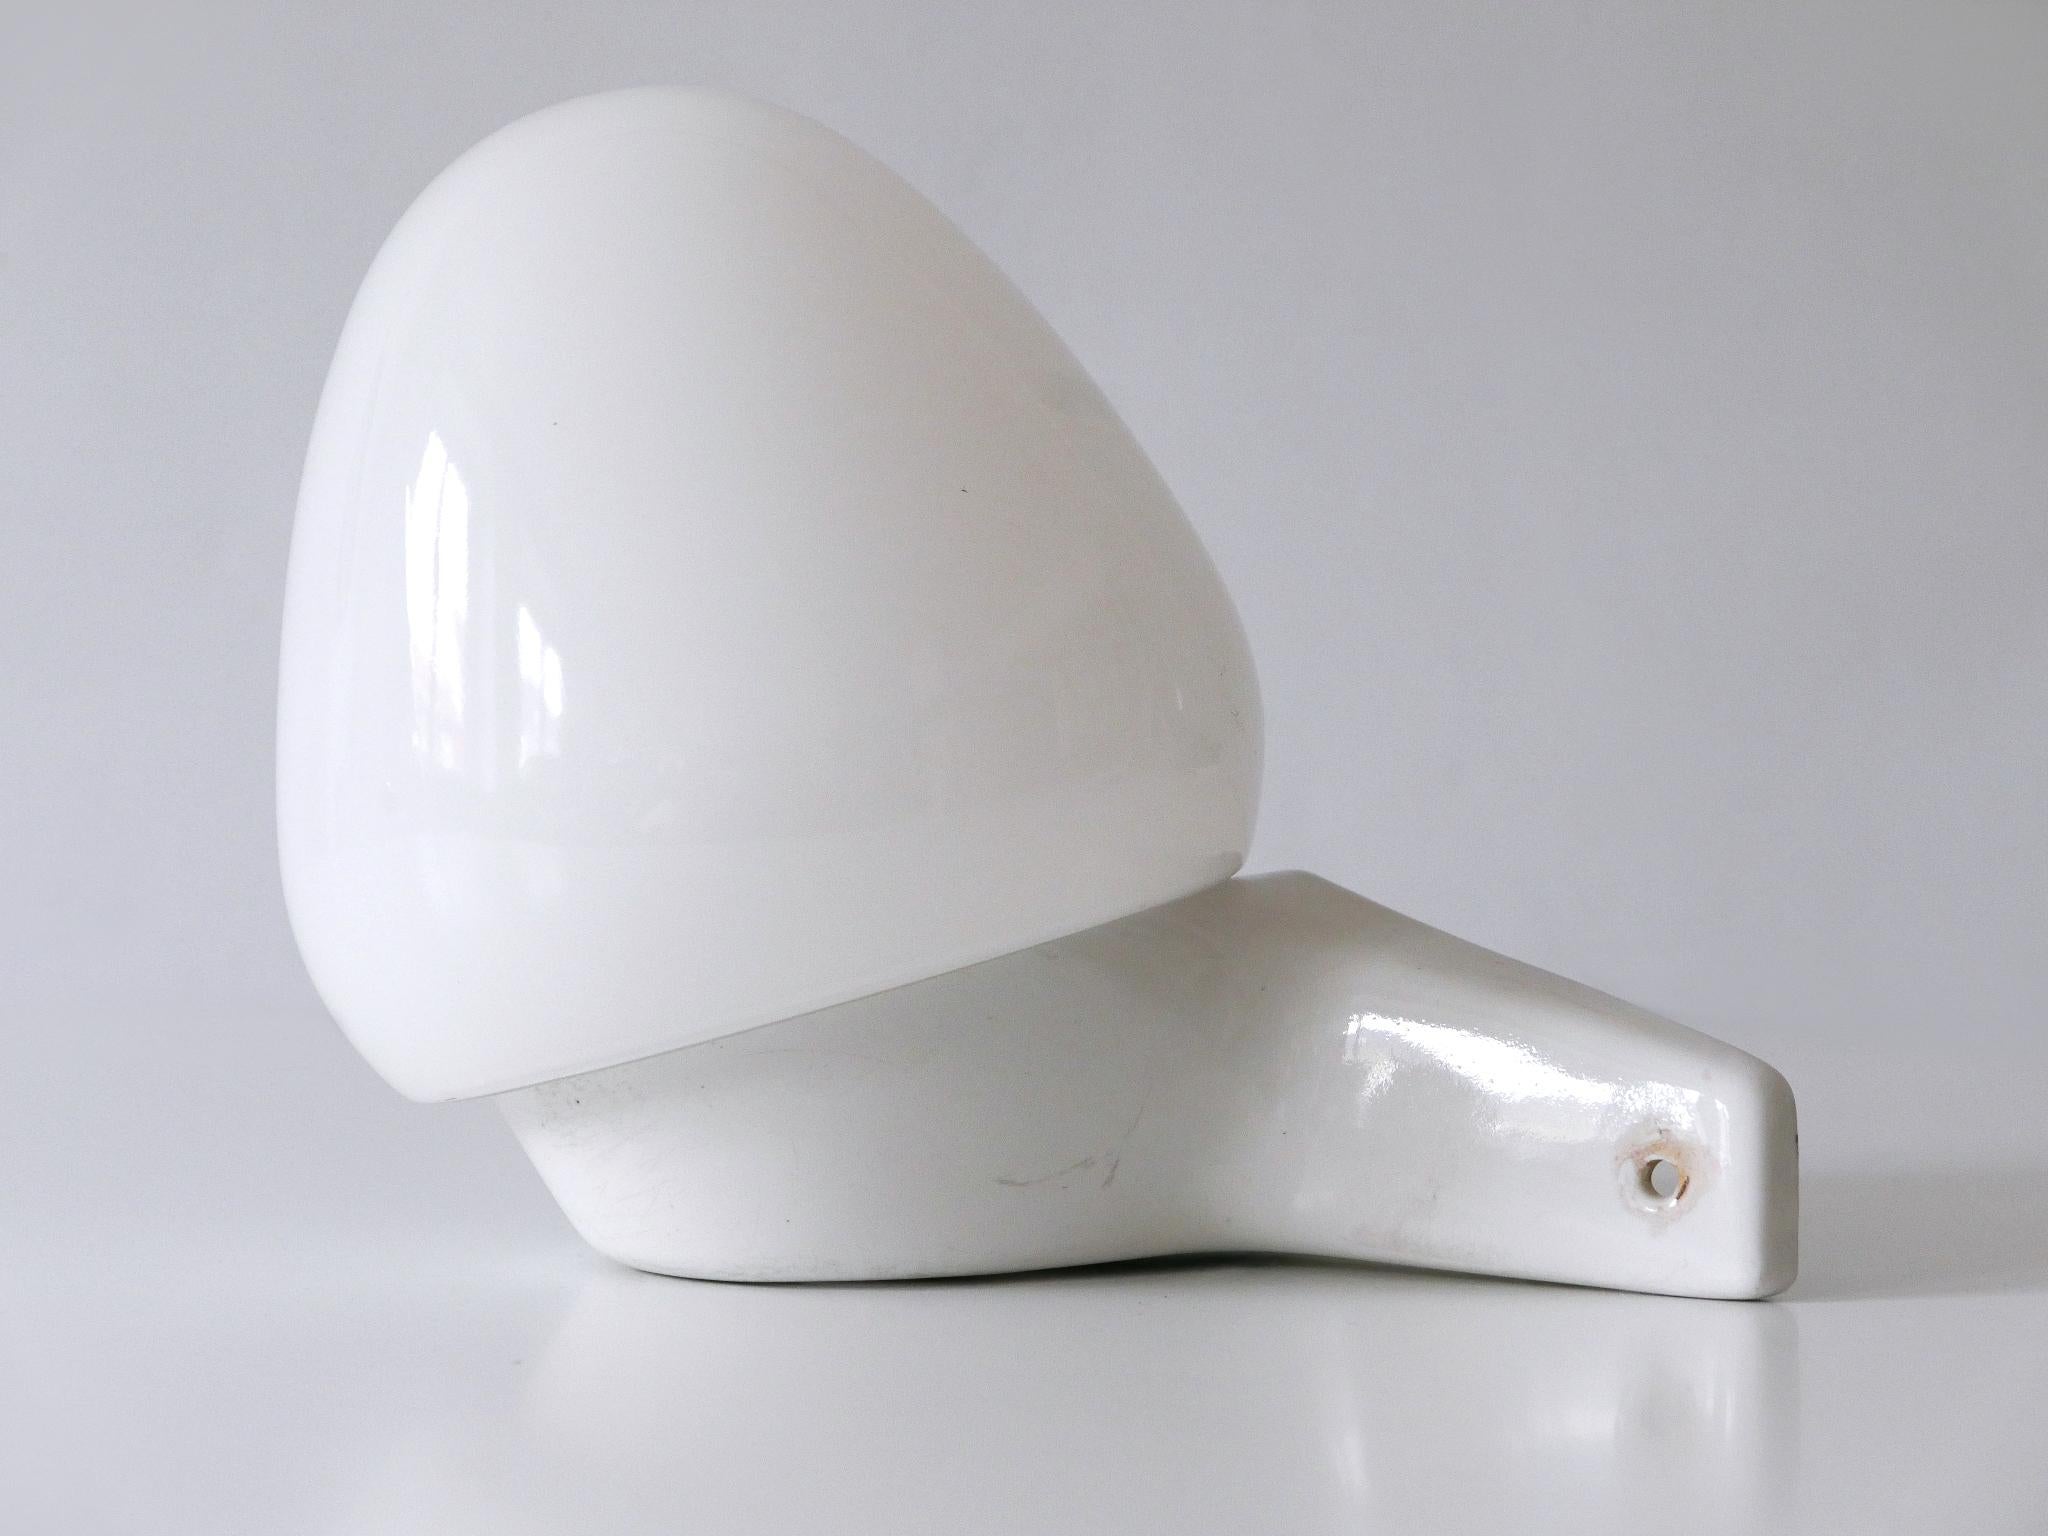 German Mid-Century Modern Wall Lamp or Sconce by Wilhelm Wagenfeld for Lindner 1950s For Sale